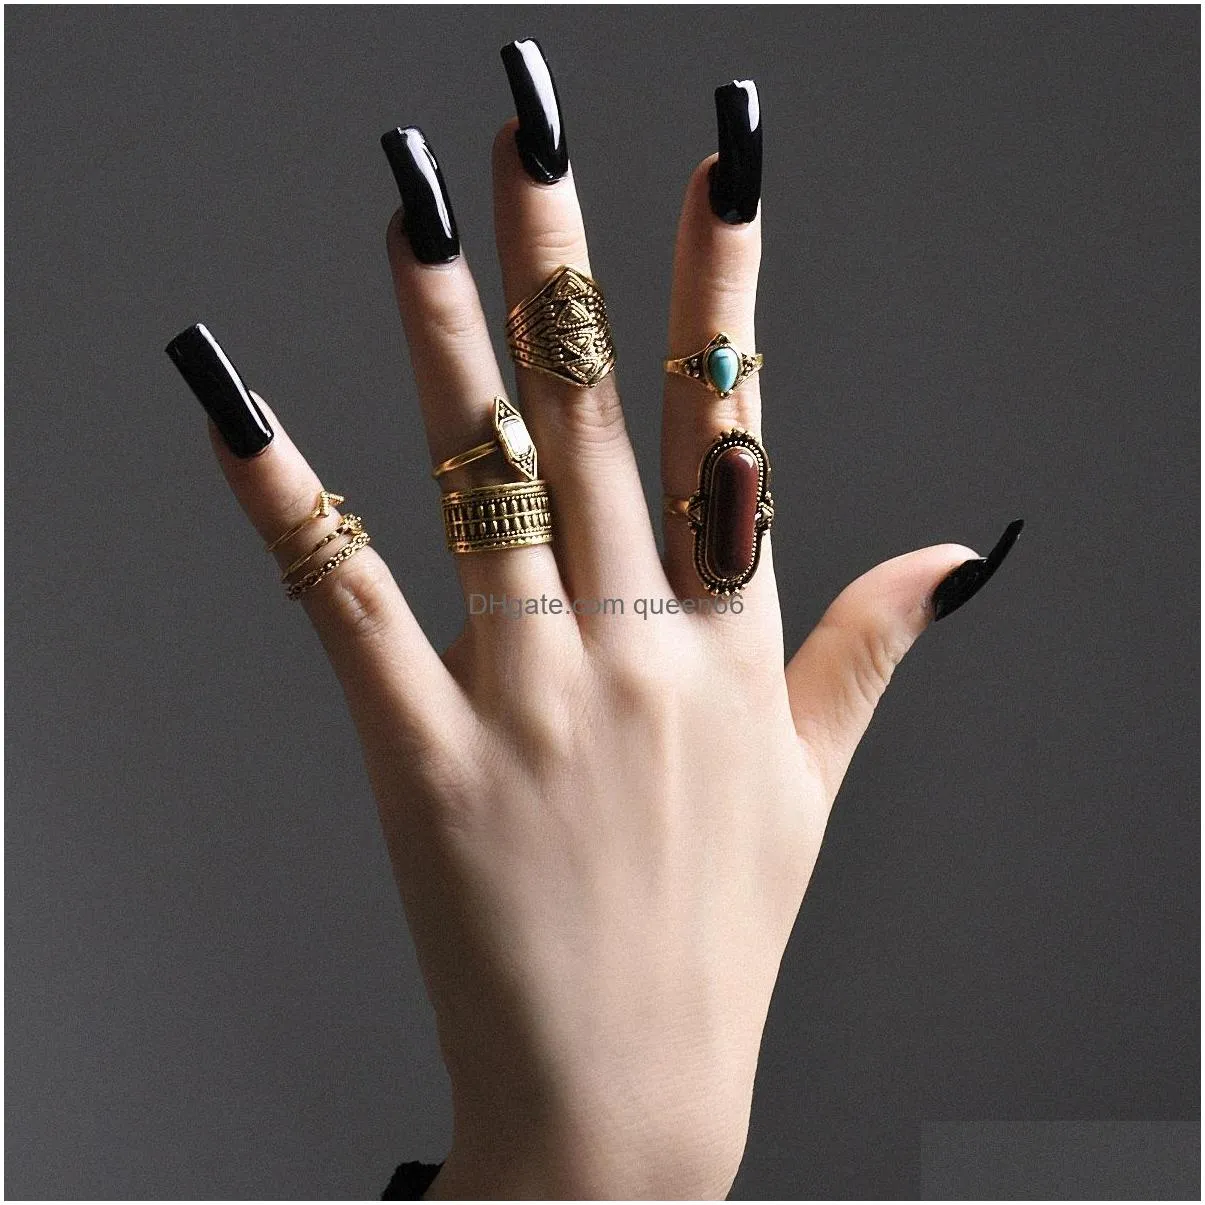 fashion jewelry knuckle ring set gold pine rings exaggerated midi rings sets 8pcs set